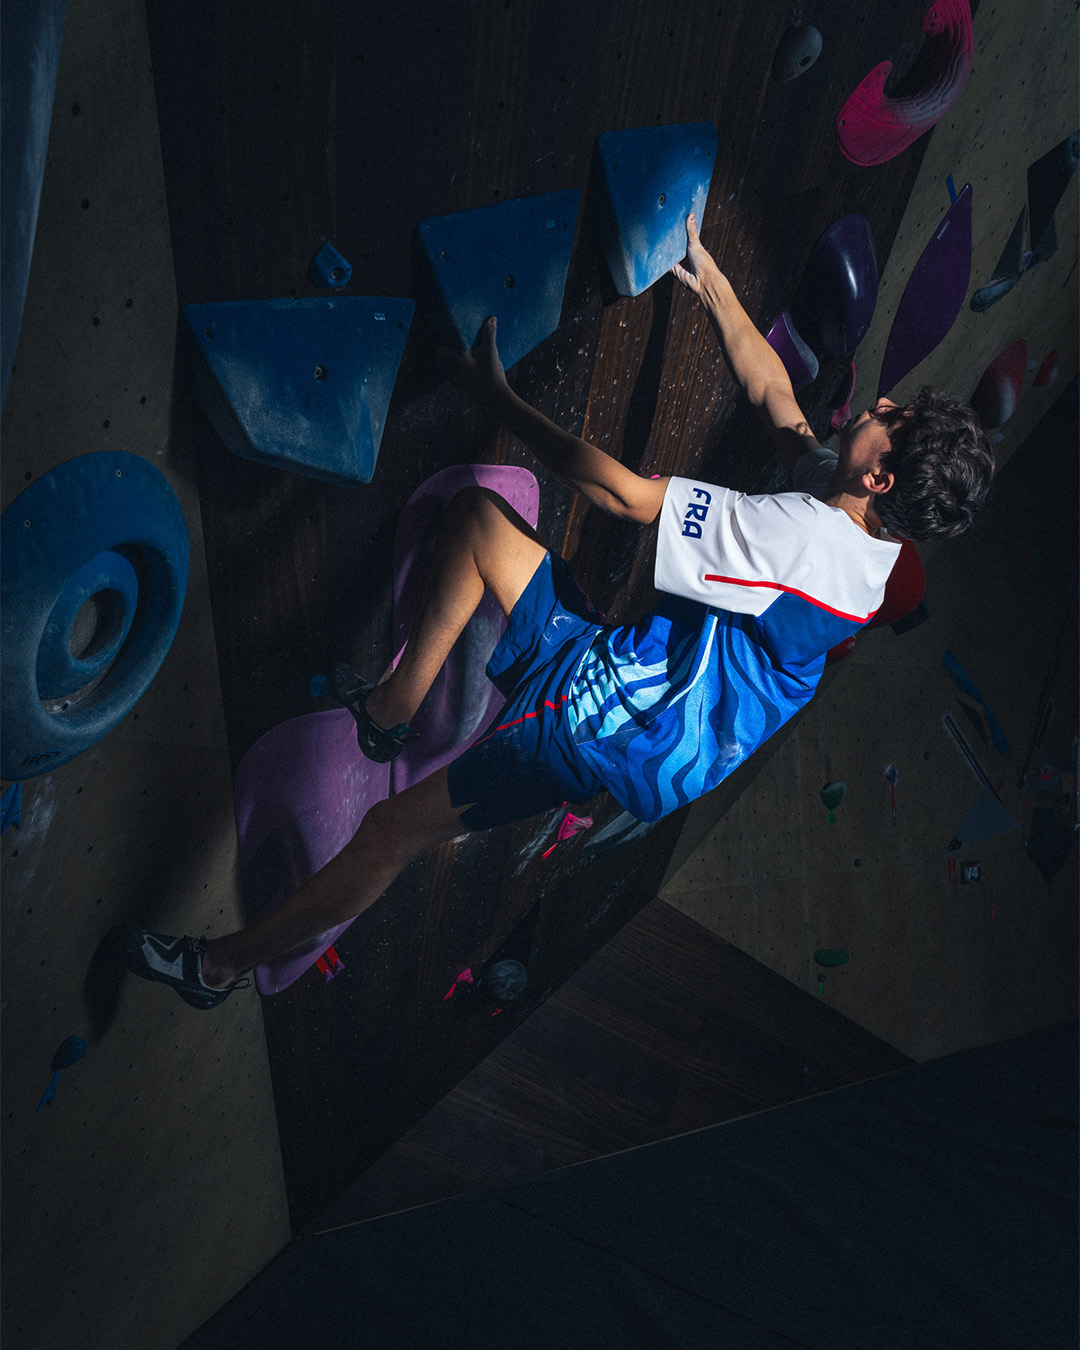 Climber in sportswear ascending a bouldering wall, focusing on grip and technique